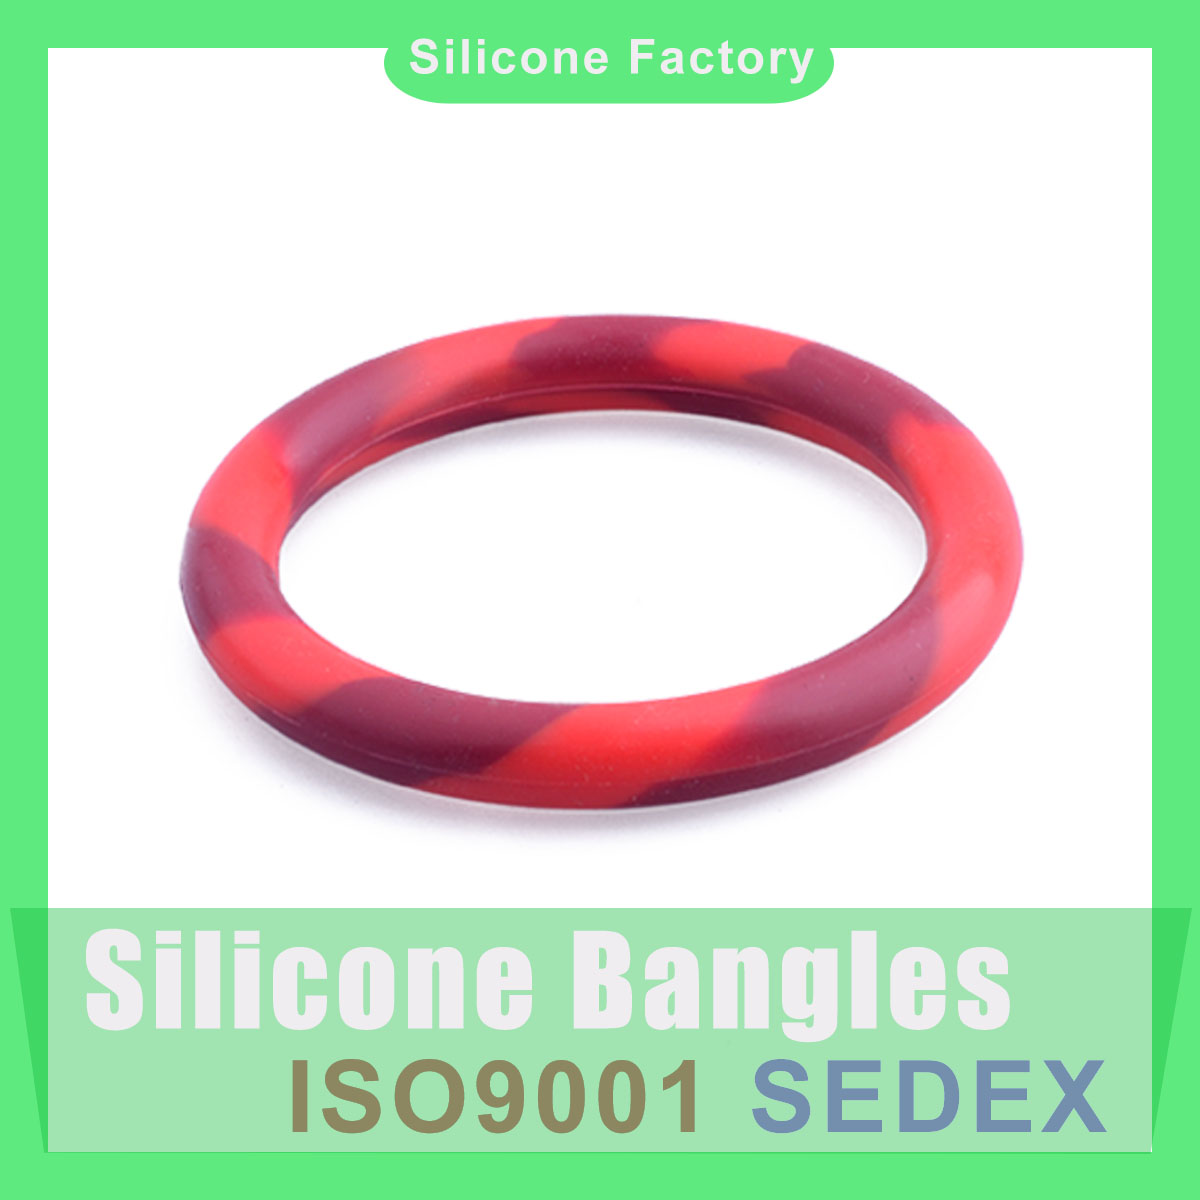 Silicone ring bangles for baby teething sp-1020 11